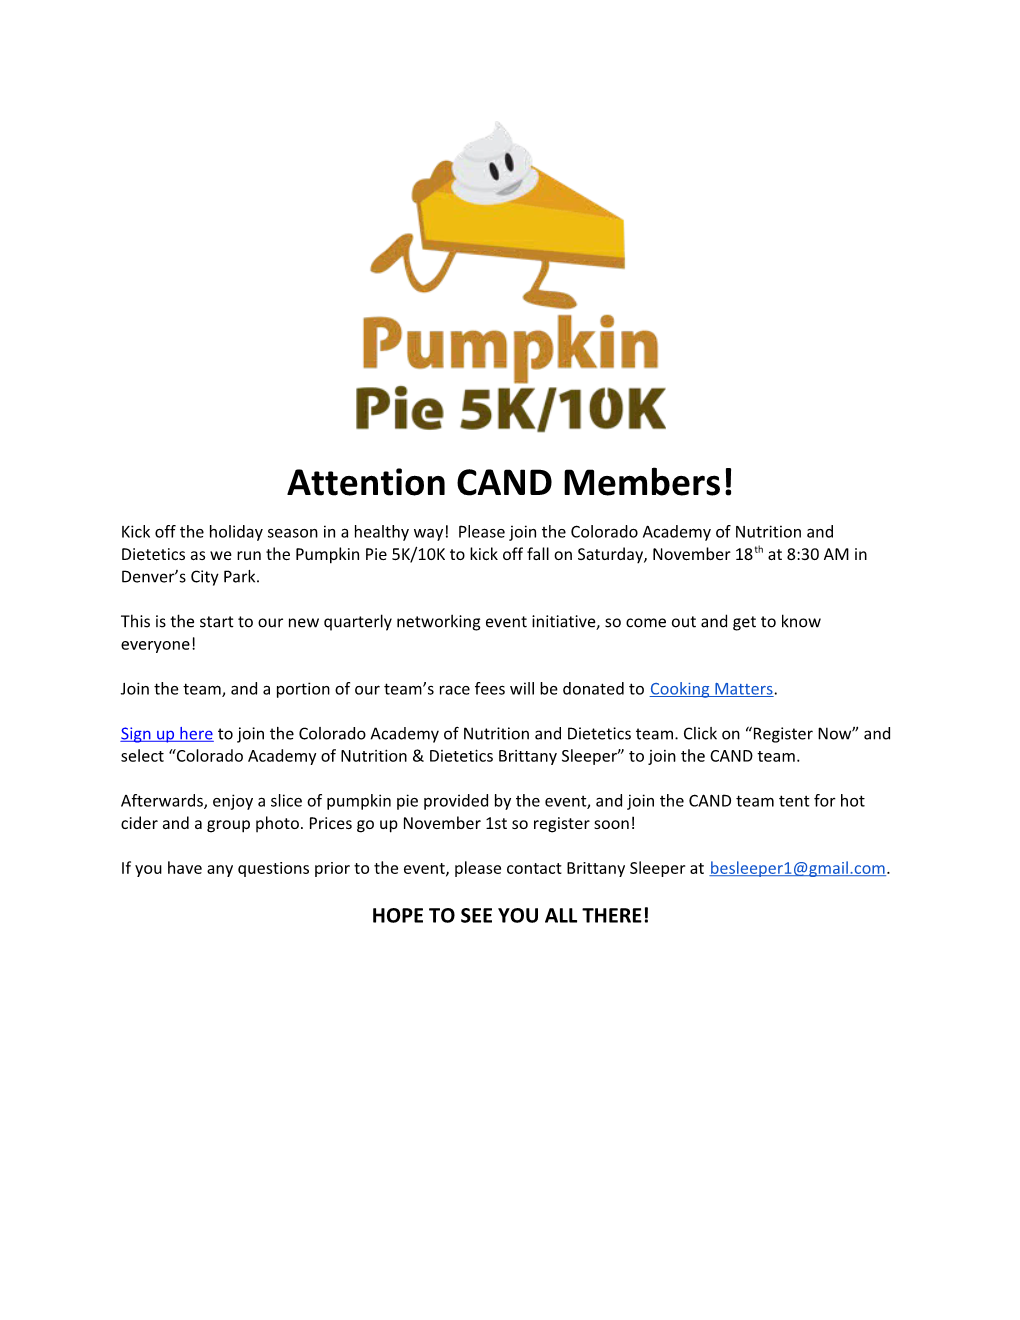 Attention CAND Members!